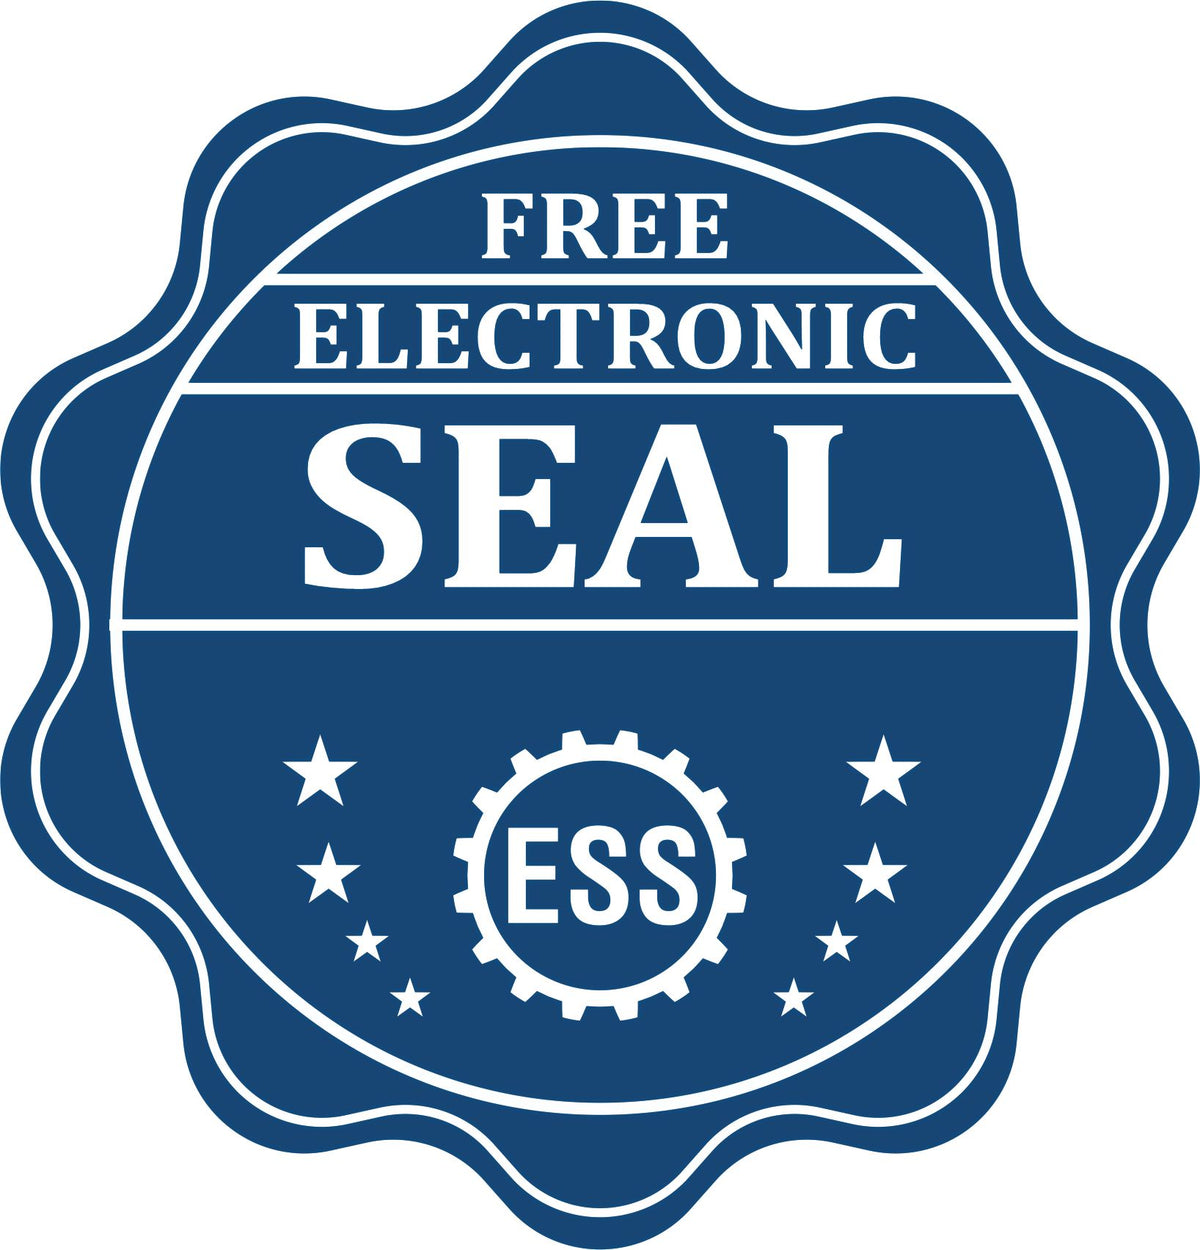 A badge showing a free electronic seal for the State of Utah Long Reach Architectural Embossing Seal with stars and the ESS gear on the emblem.